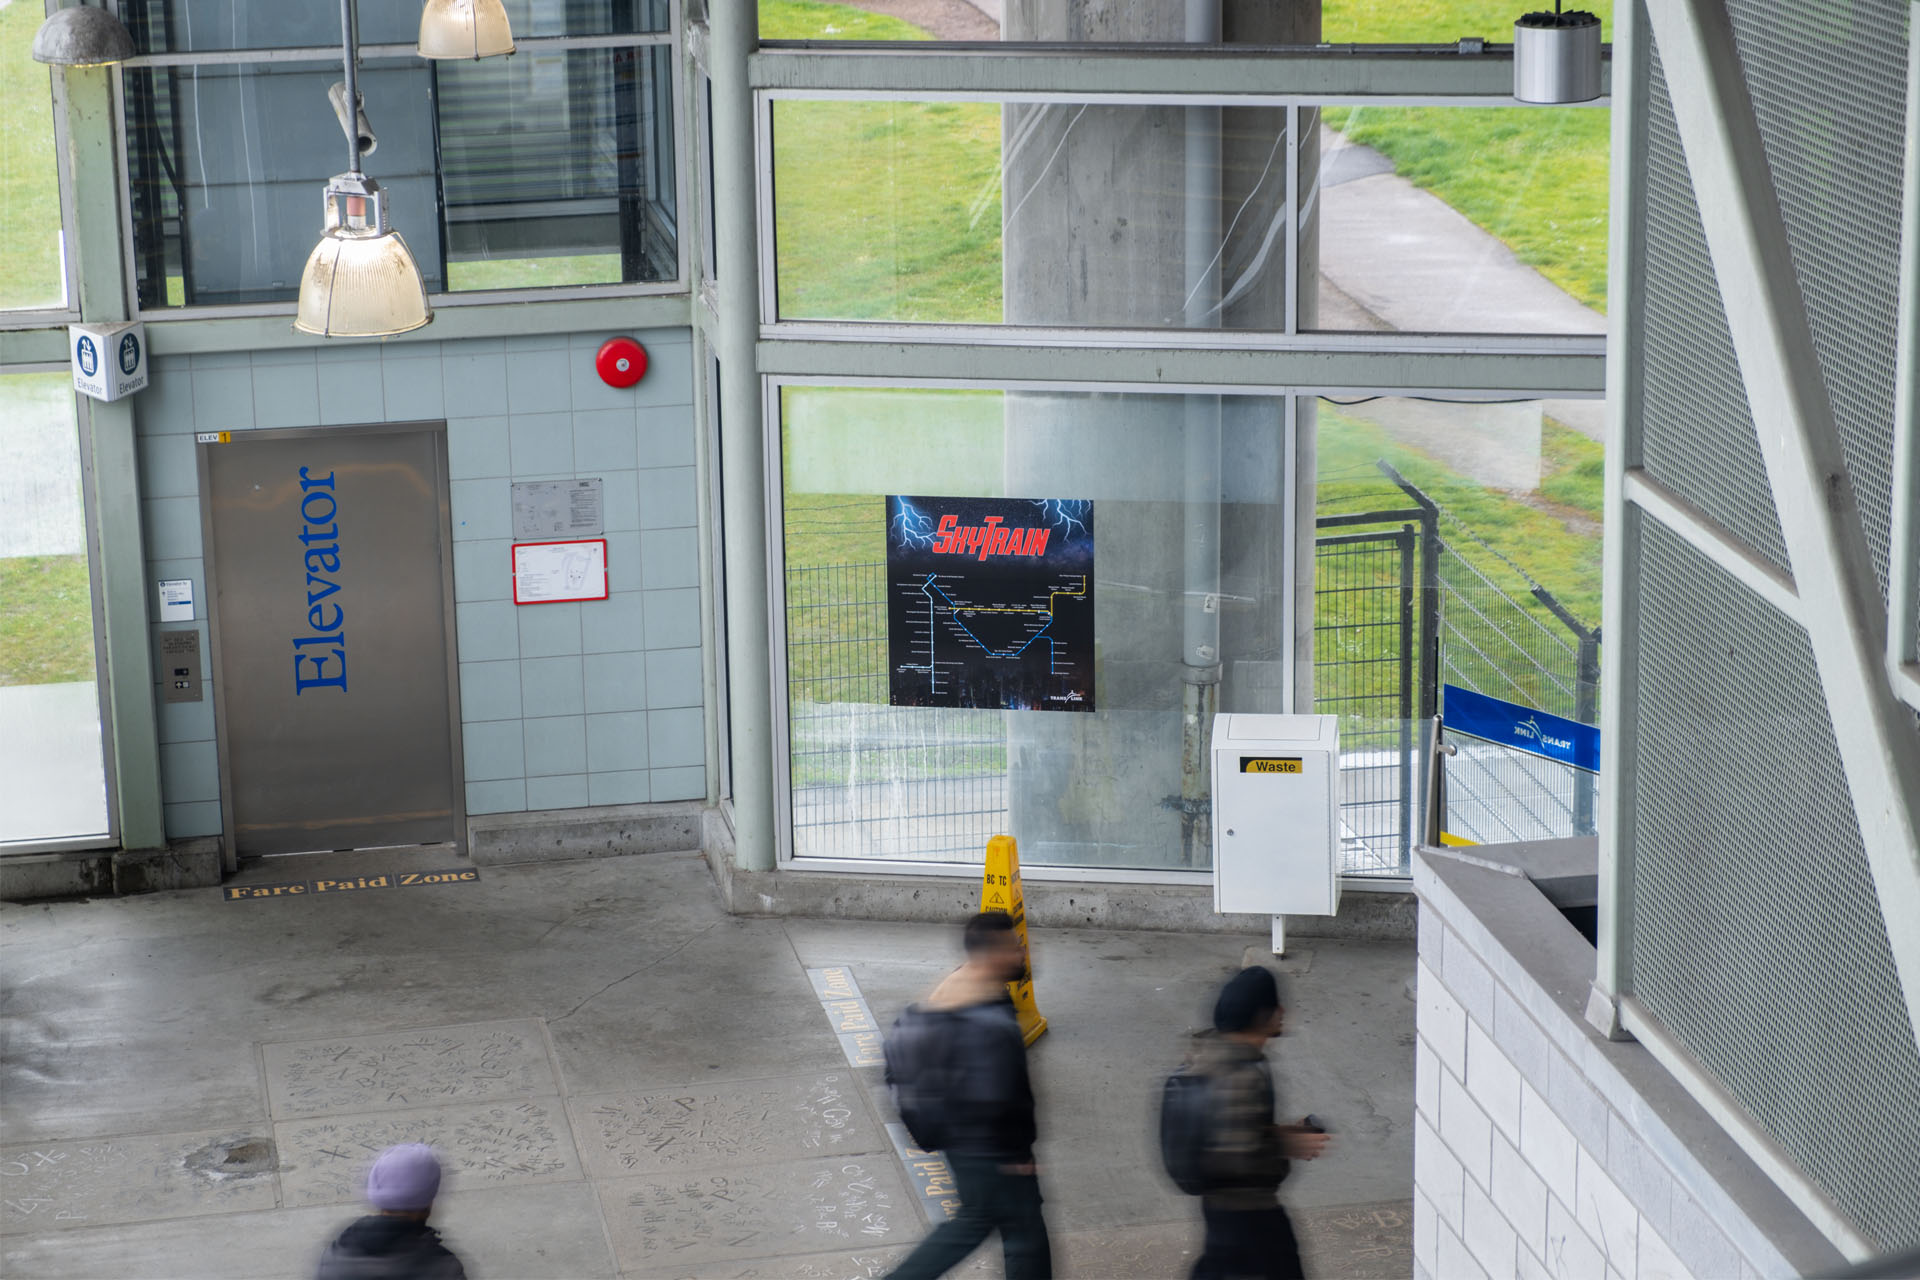 People walking by the Avengers SkyTrain map at Braid Station